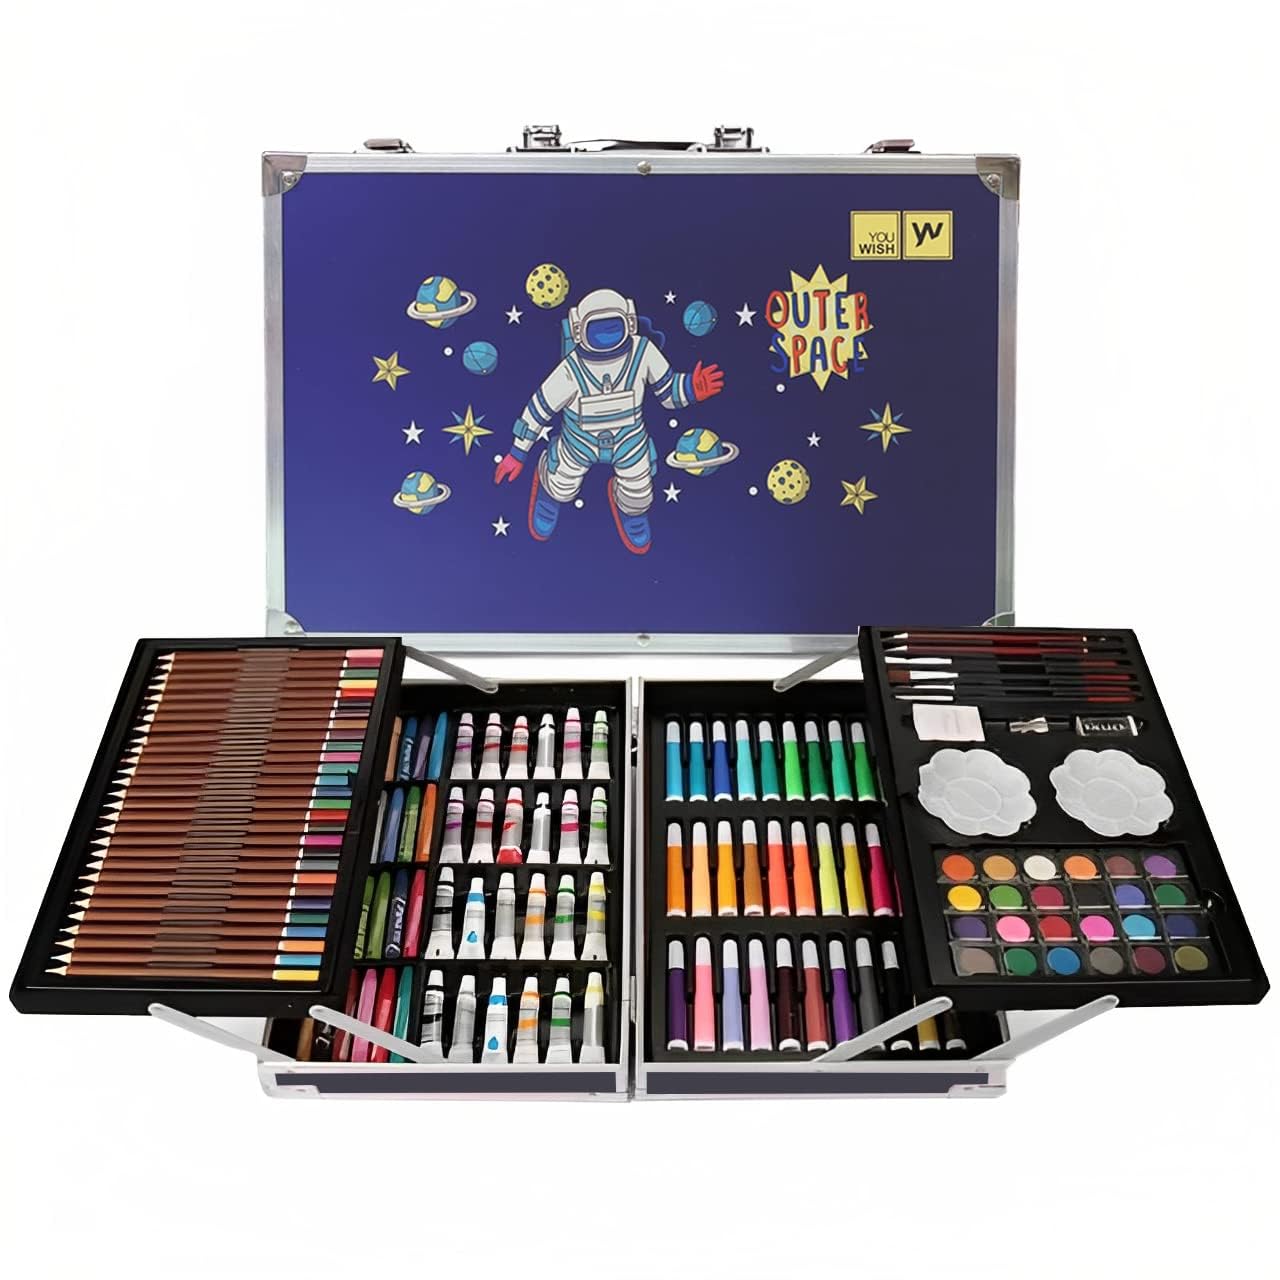 Outer Space Theme 145pcs Art Painting Box for Kids & Adults